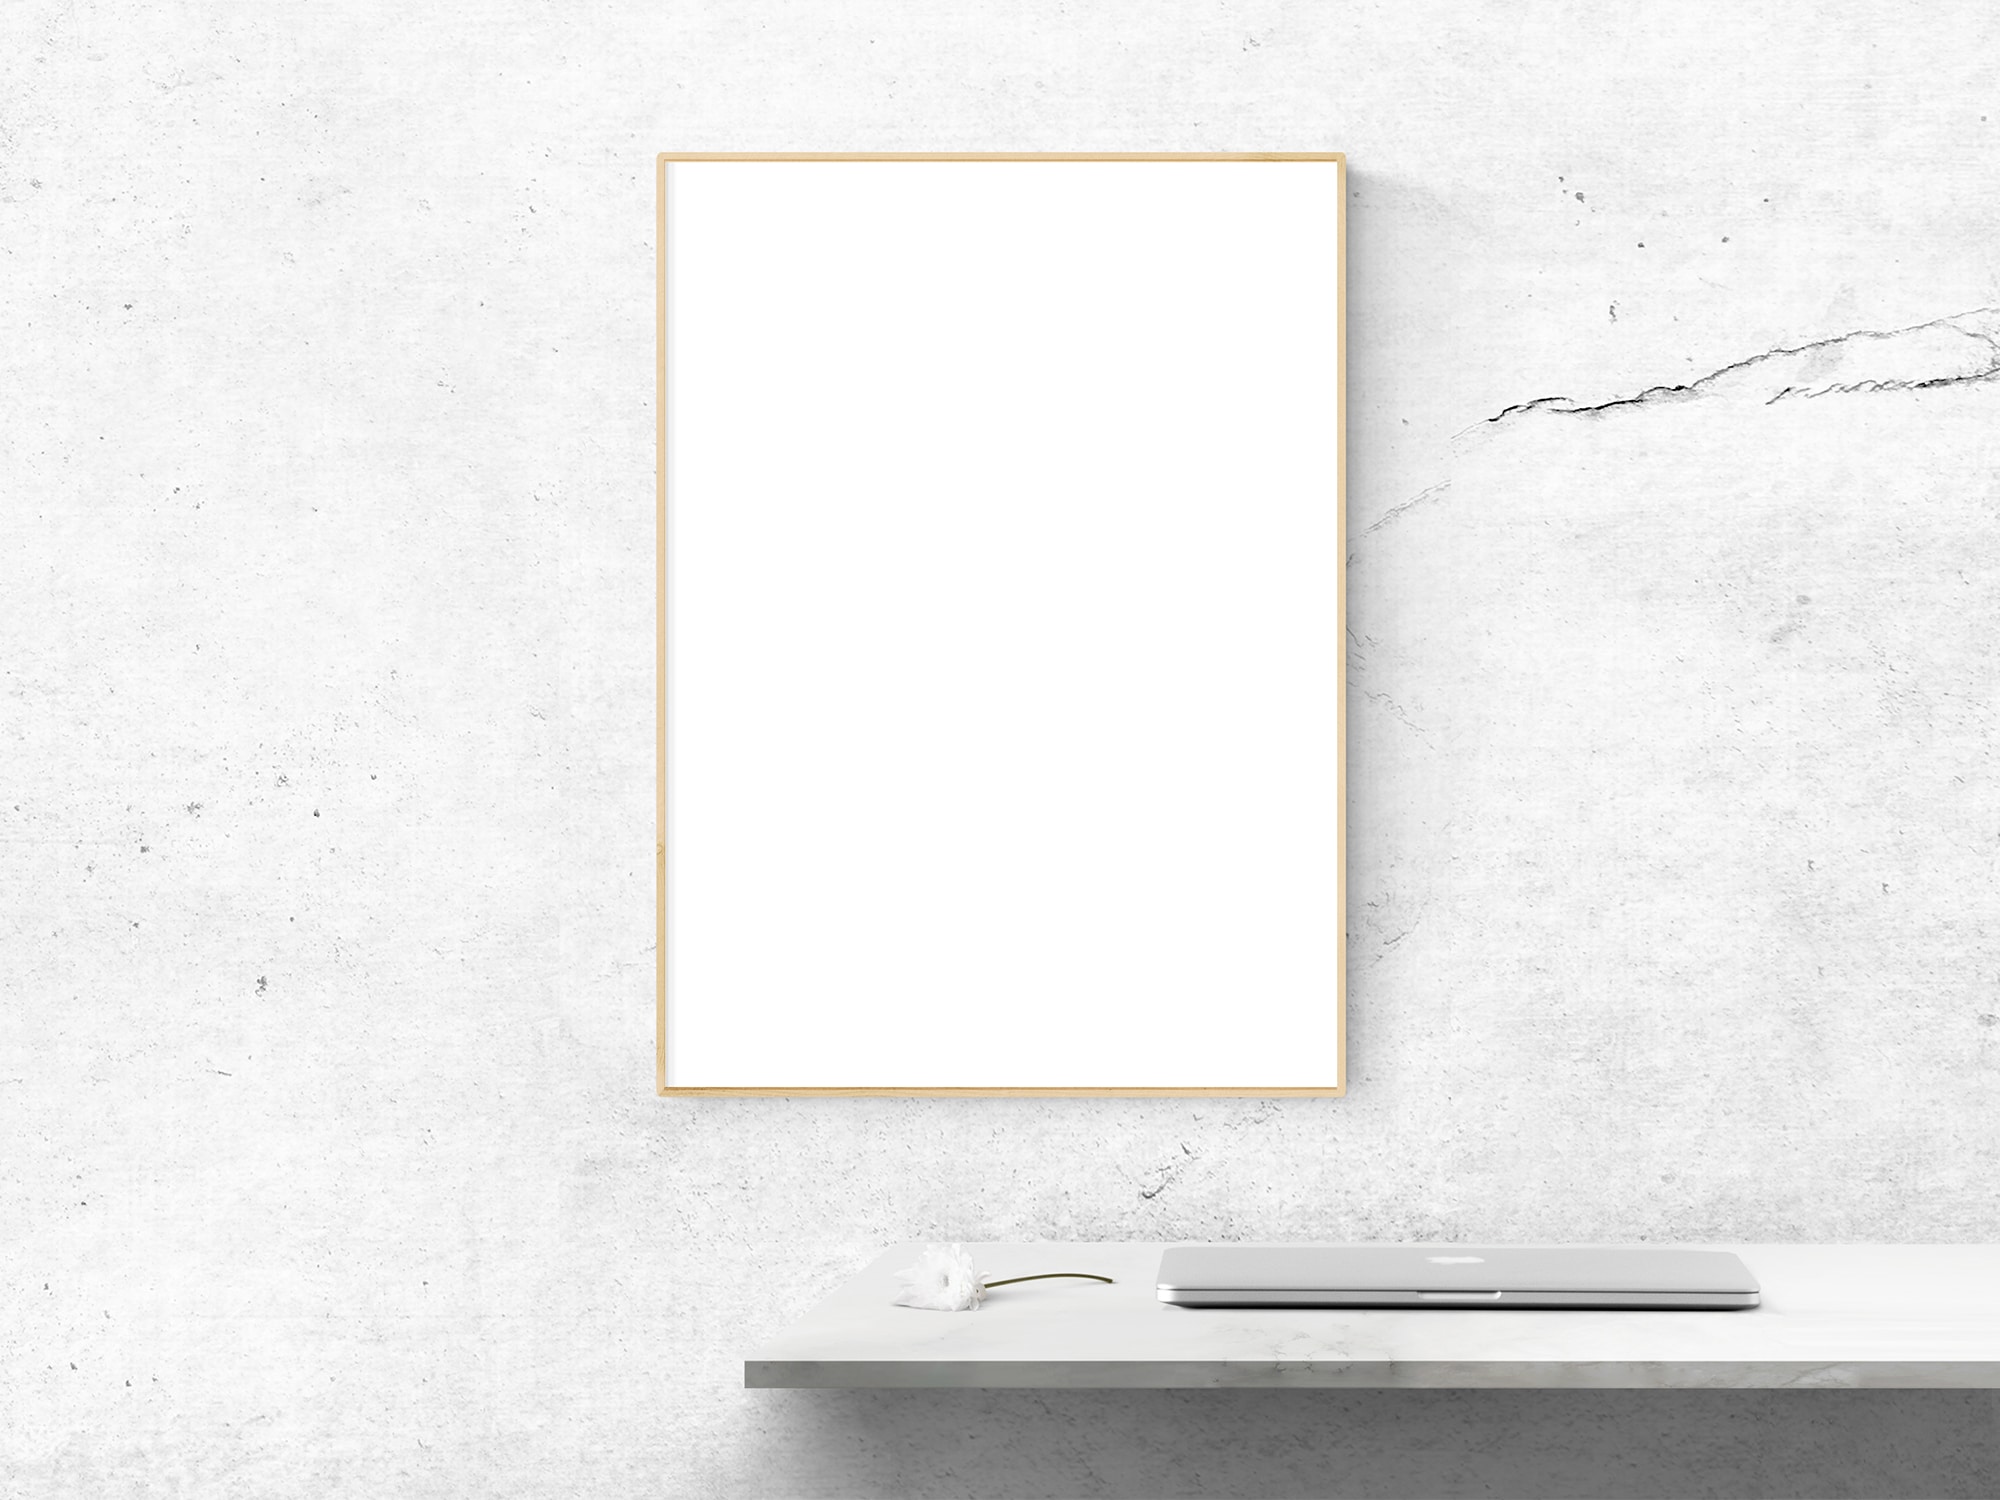 Download Poster on Concrete Wall Mockup | The Mockup Club